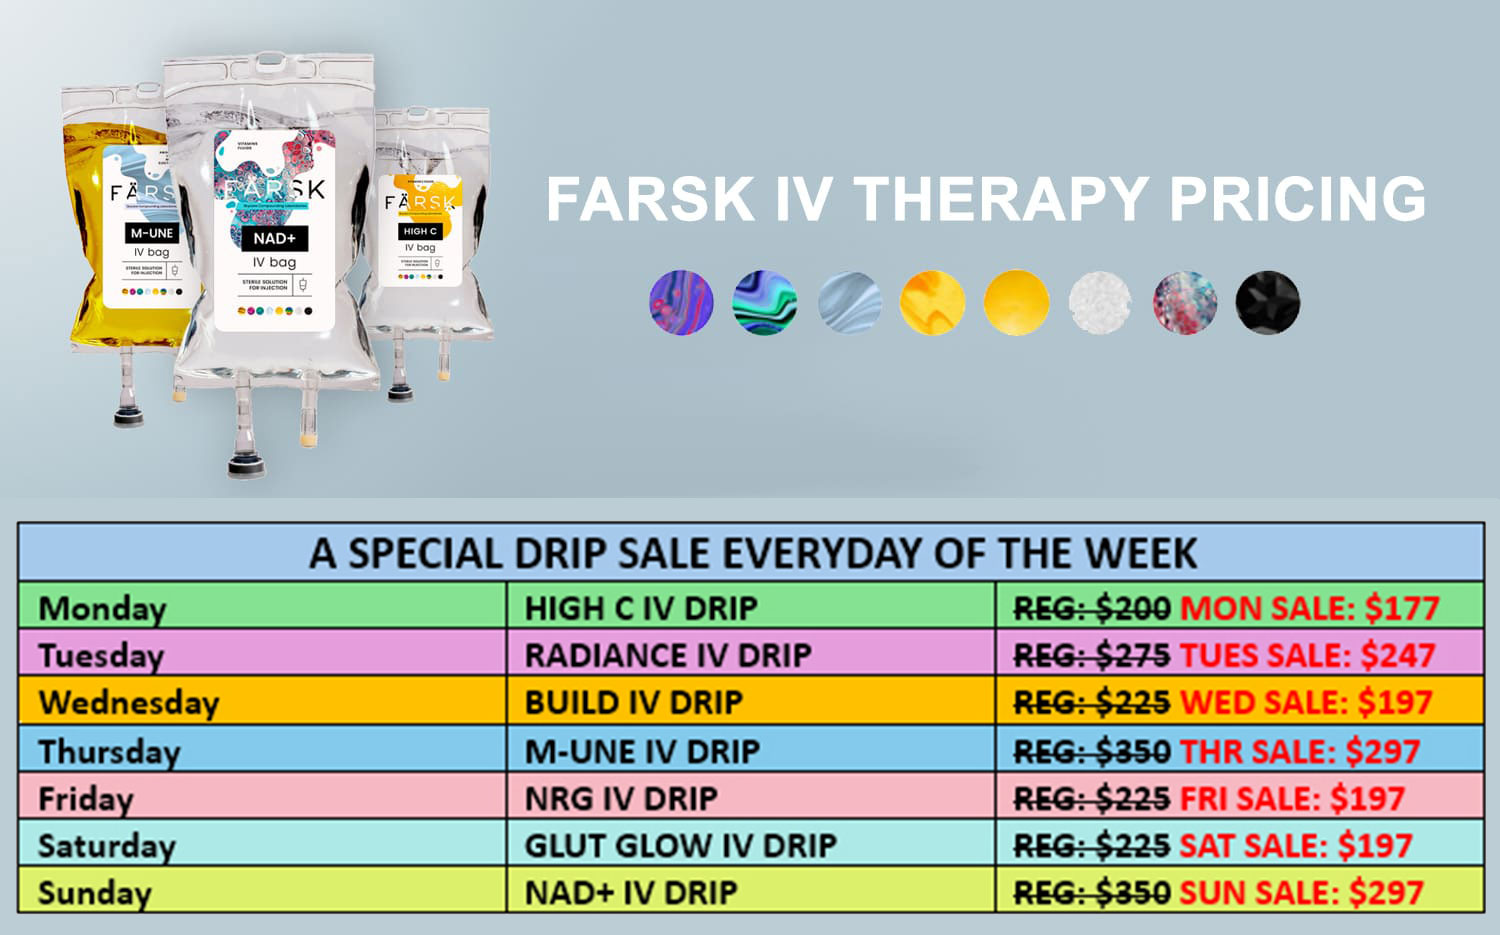 Farsk iv therapy pricing